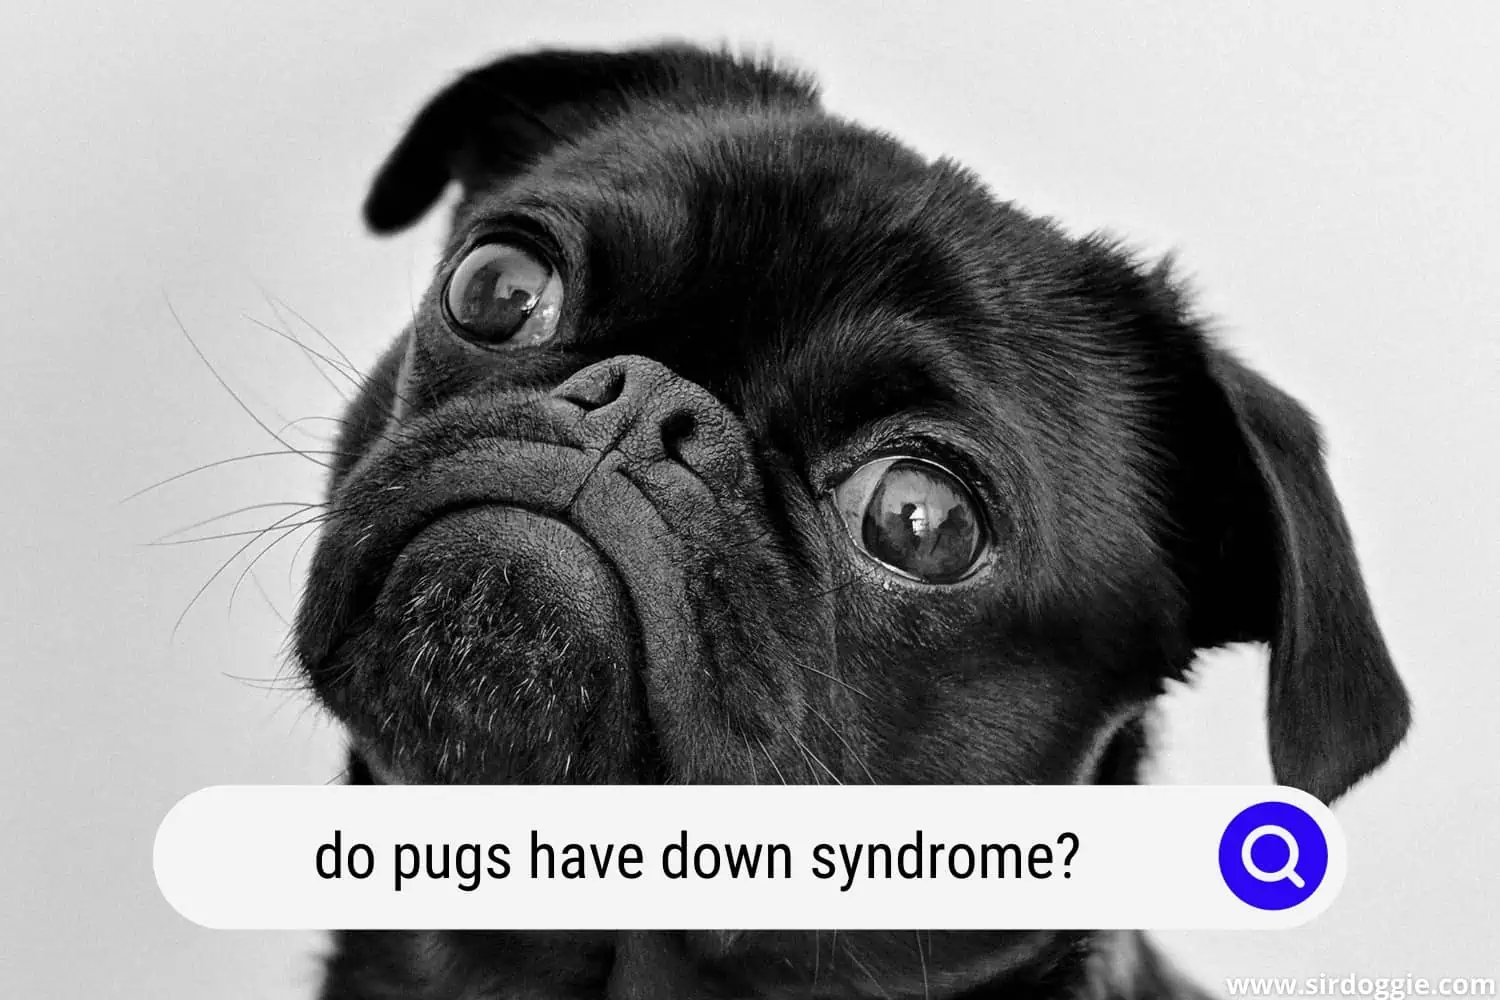 do pugs have down syndrome